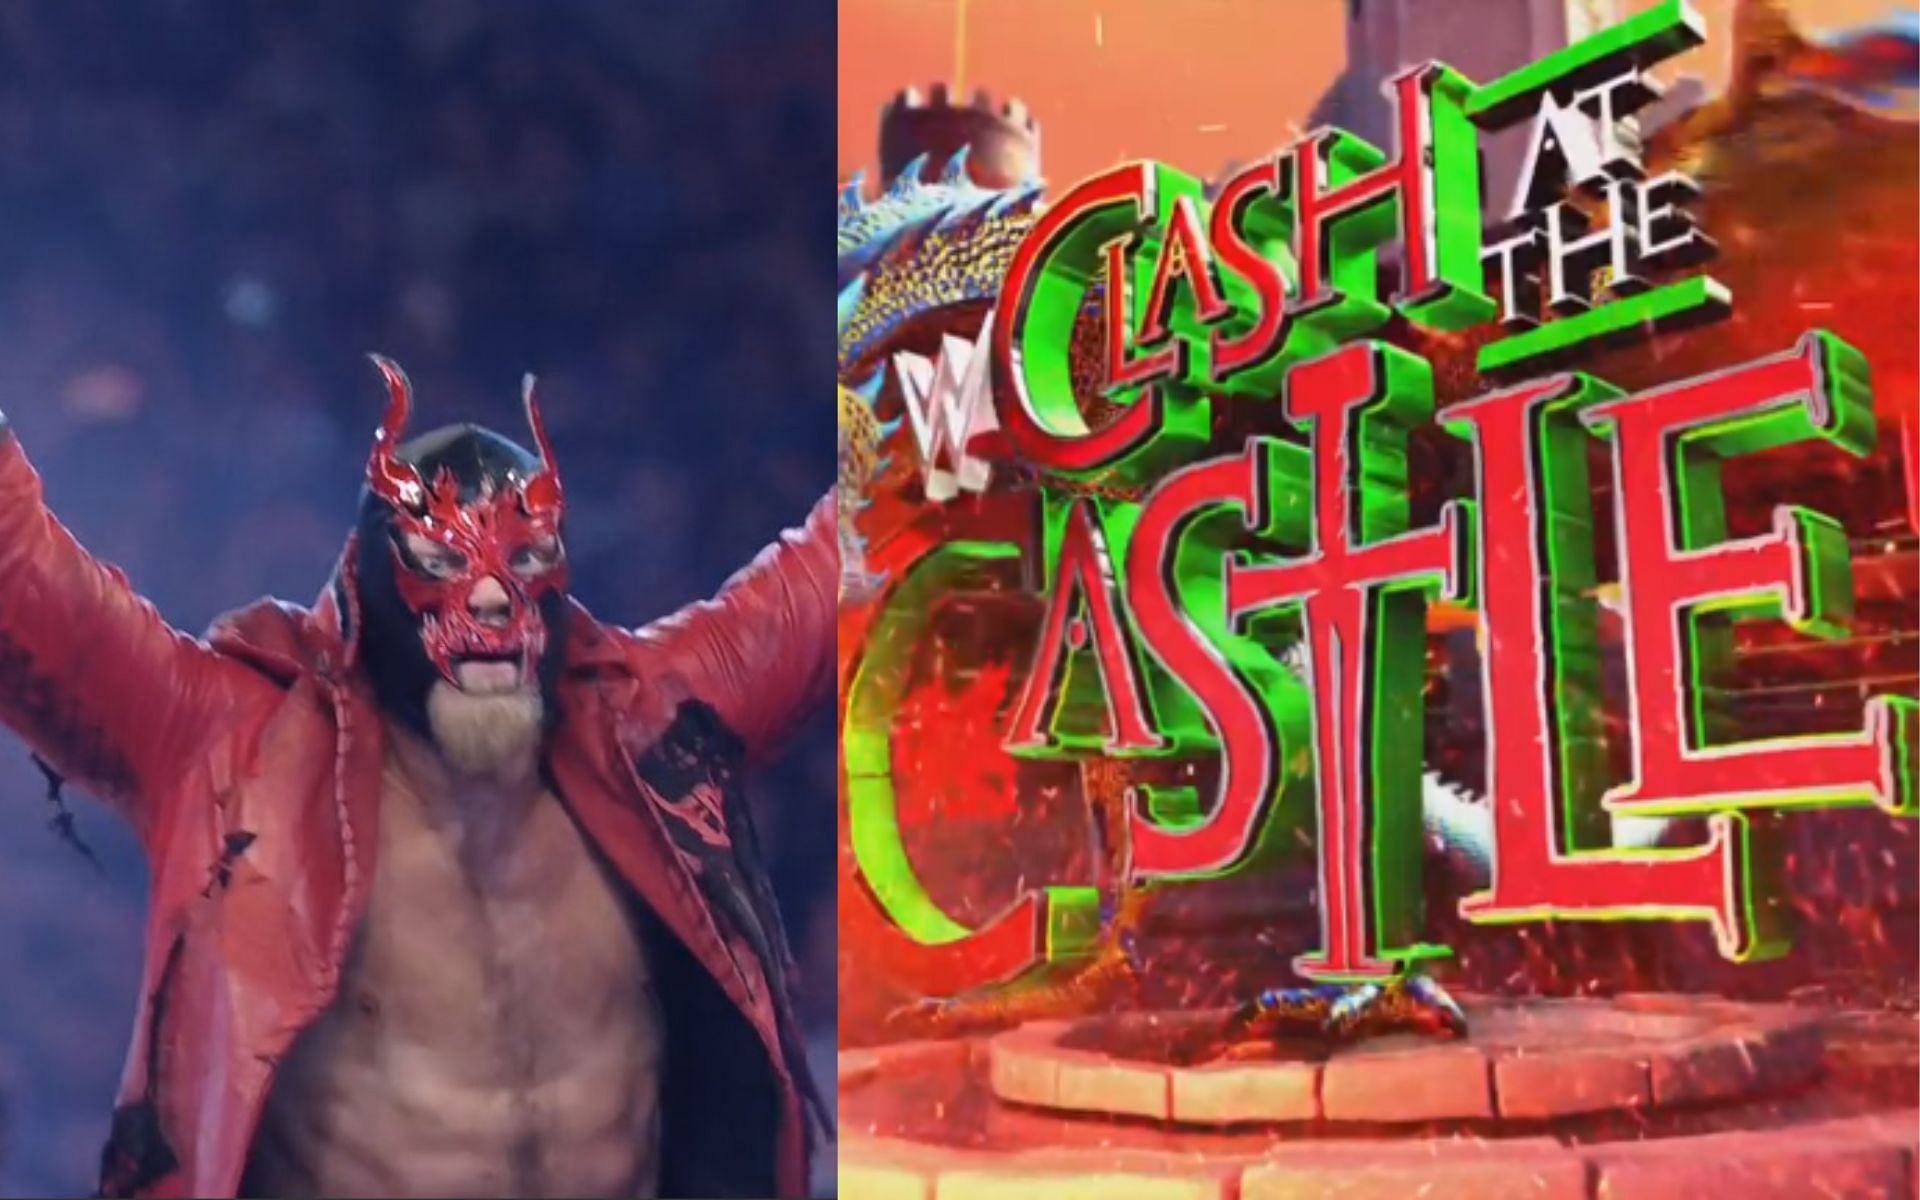 WWE Hall of Famer Edge sported a new look during Clash at the Castle event.